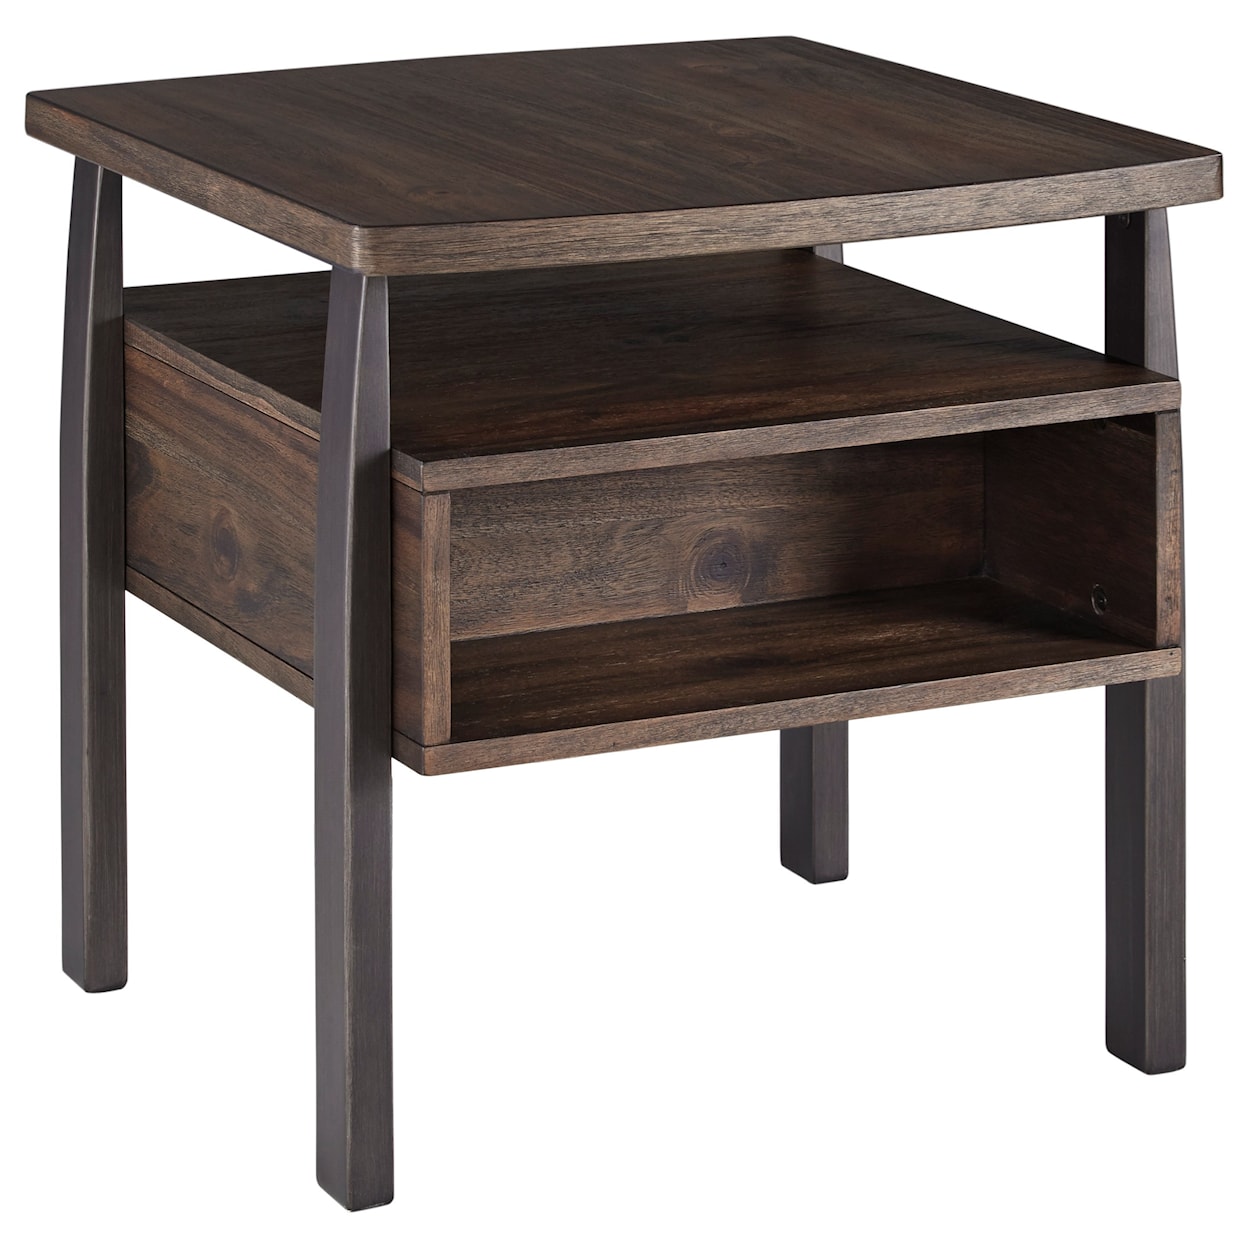 Signature Design by Ashley Furniture Vailbry Rectangular End Table